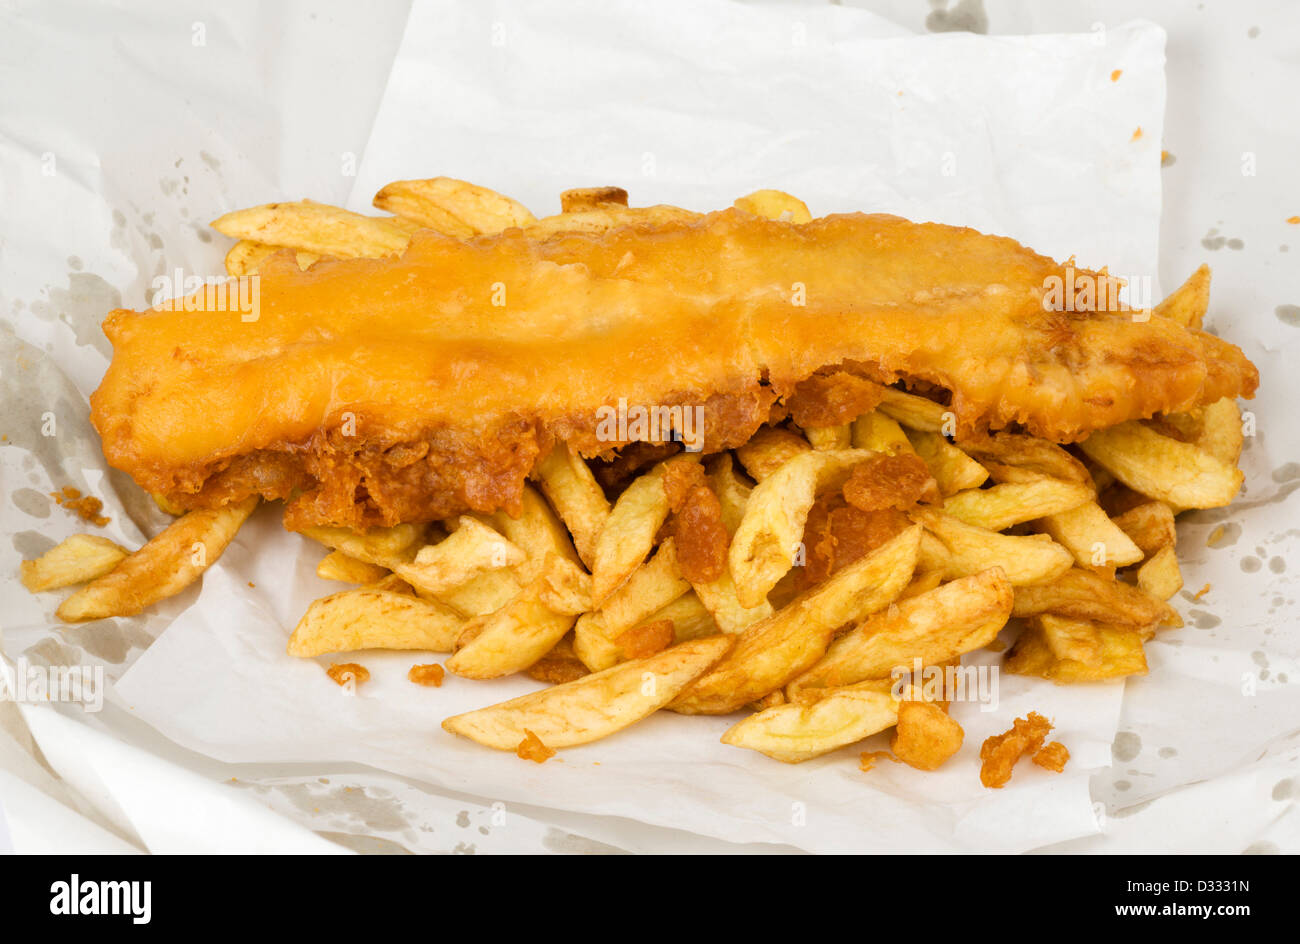 Take-away fish and chips Stock Photo